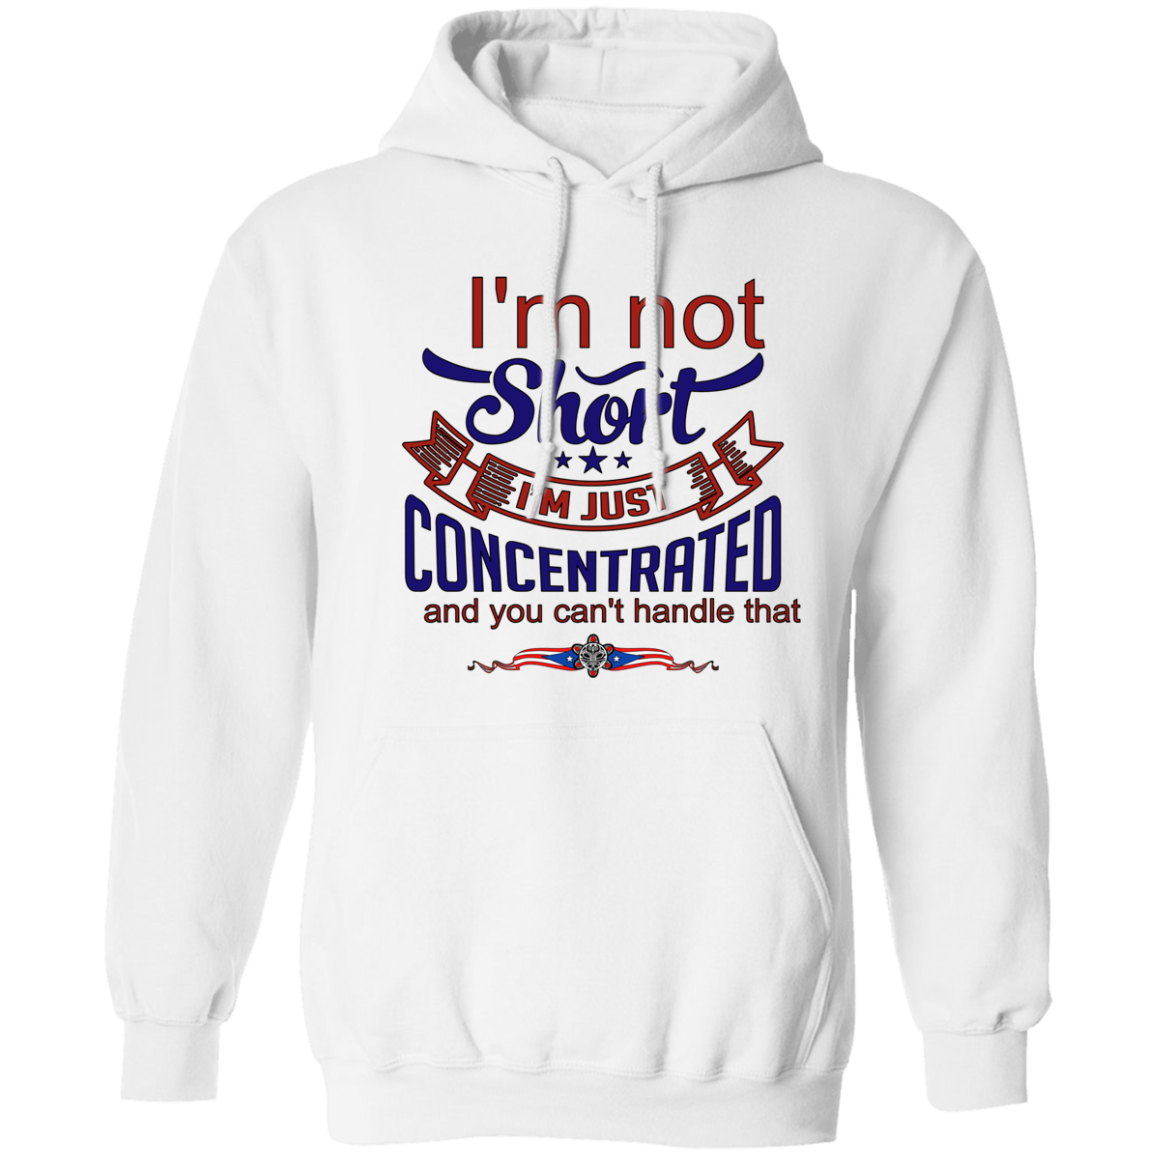 I'm Not Short, Just Concentrated Hoodie 8 oz (Closeout)